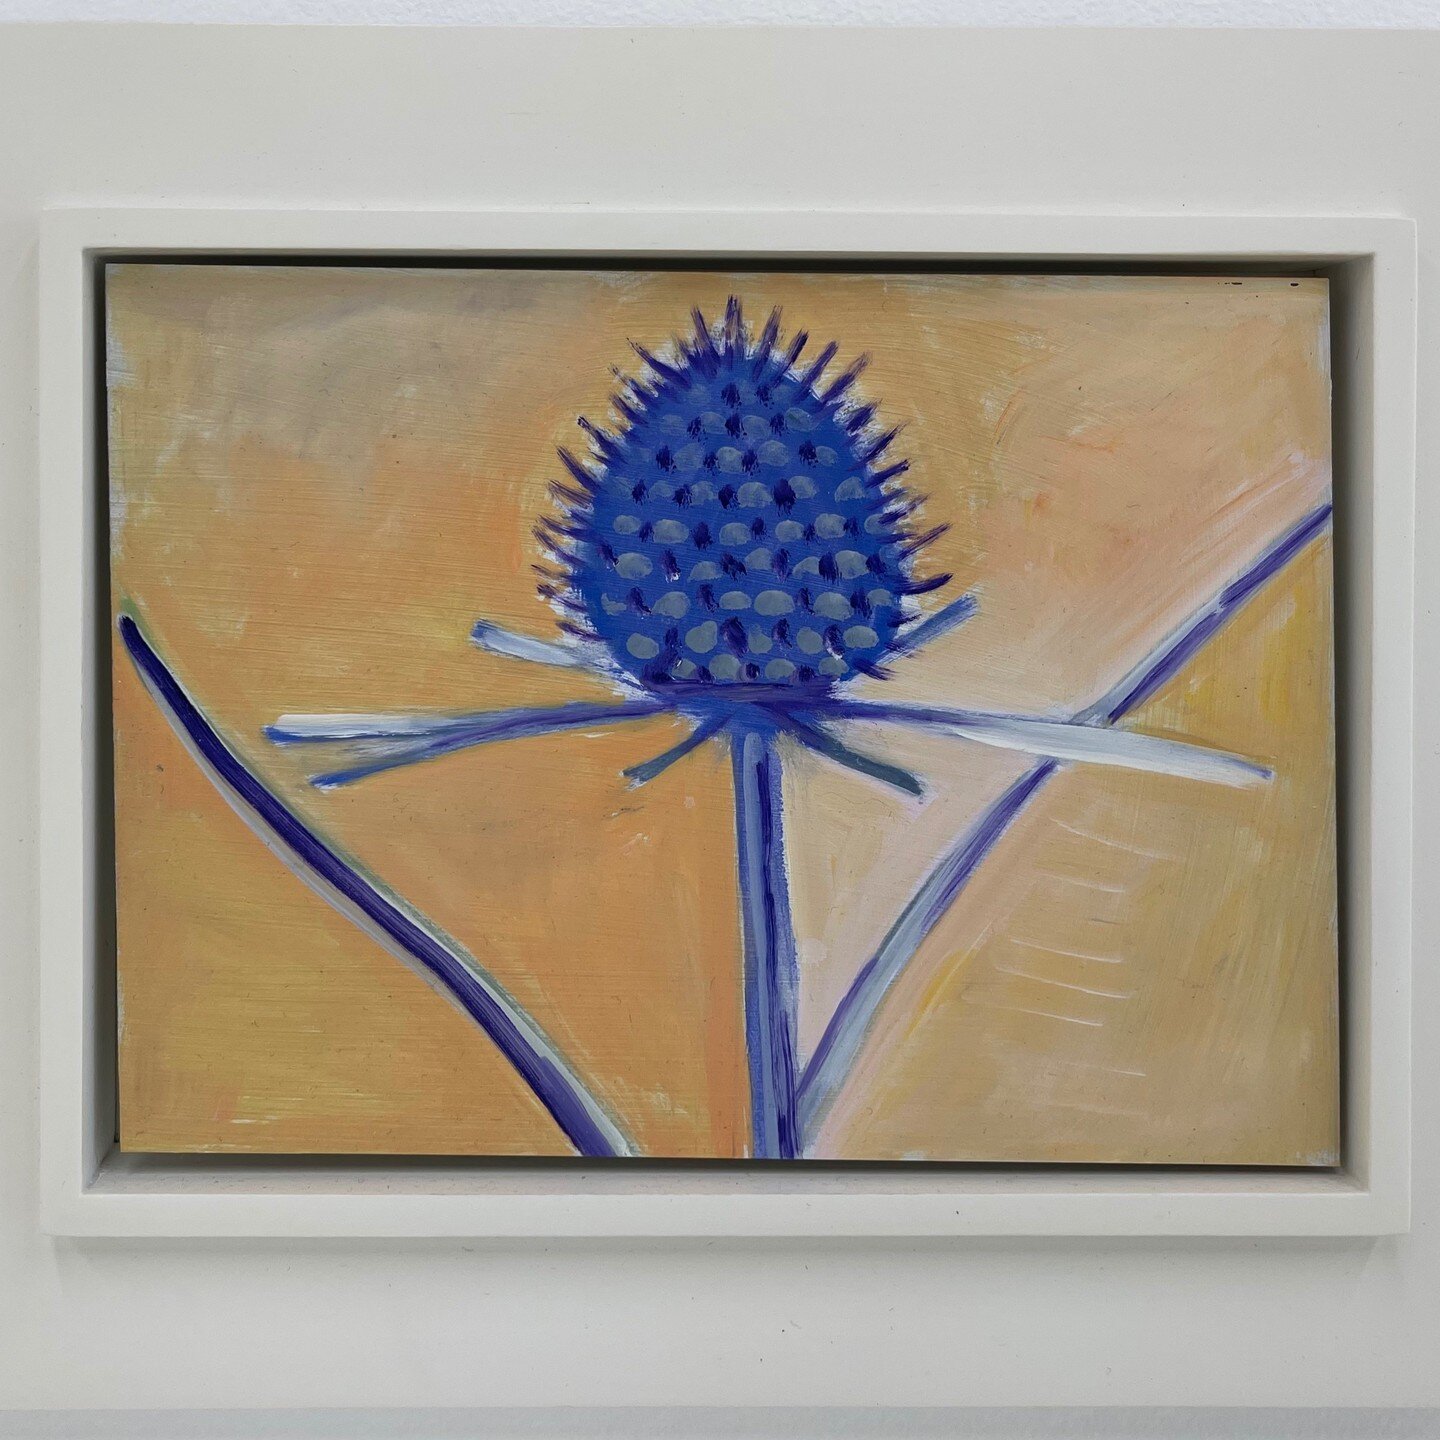 This work by Lois Dodd is currently on view in &quot;A Minor Constellation,&quot; a survey of small paintings at Chris Sharp Gallery, Los Angeles. 

The exhibition is up until September 30, 2022, and is worth paying a visit.